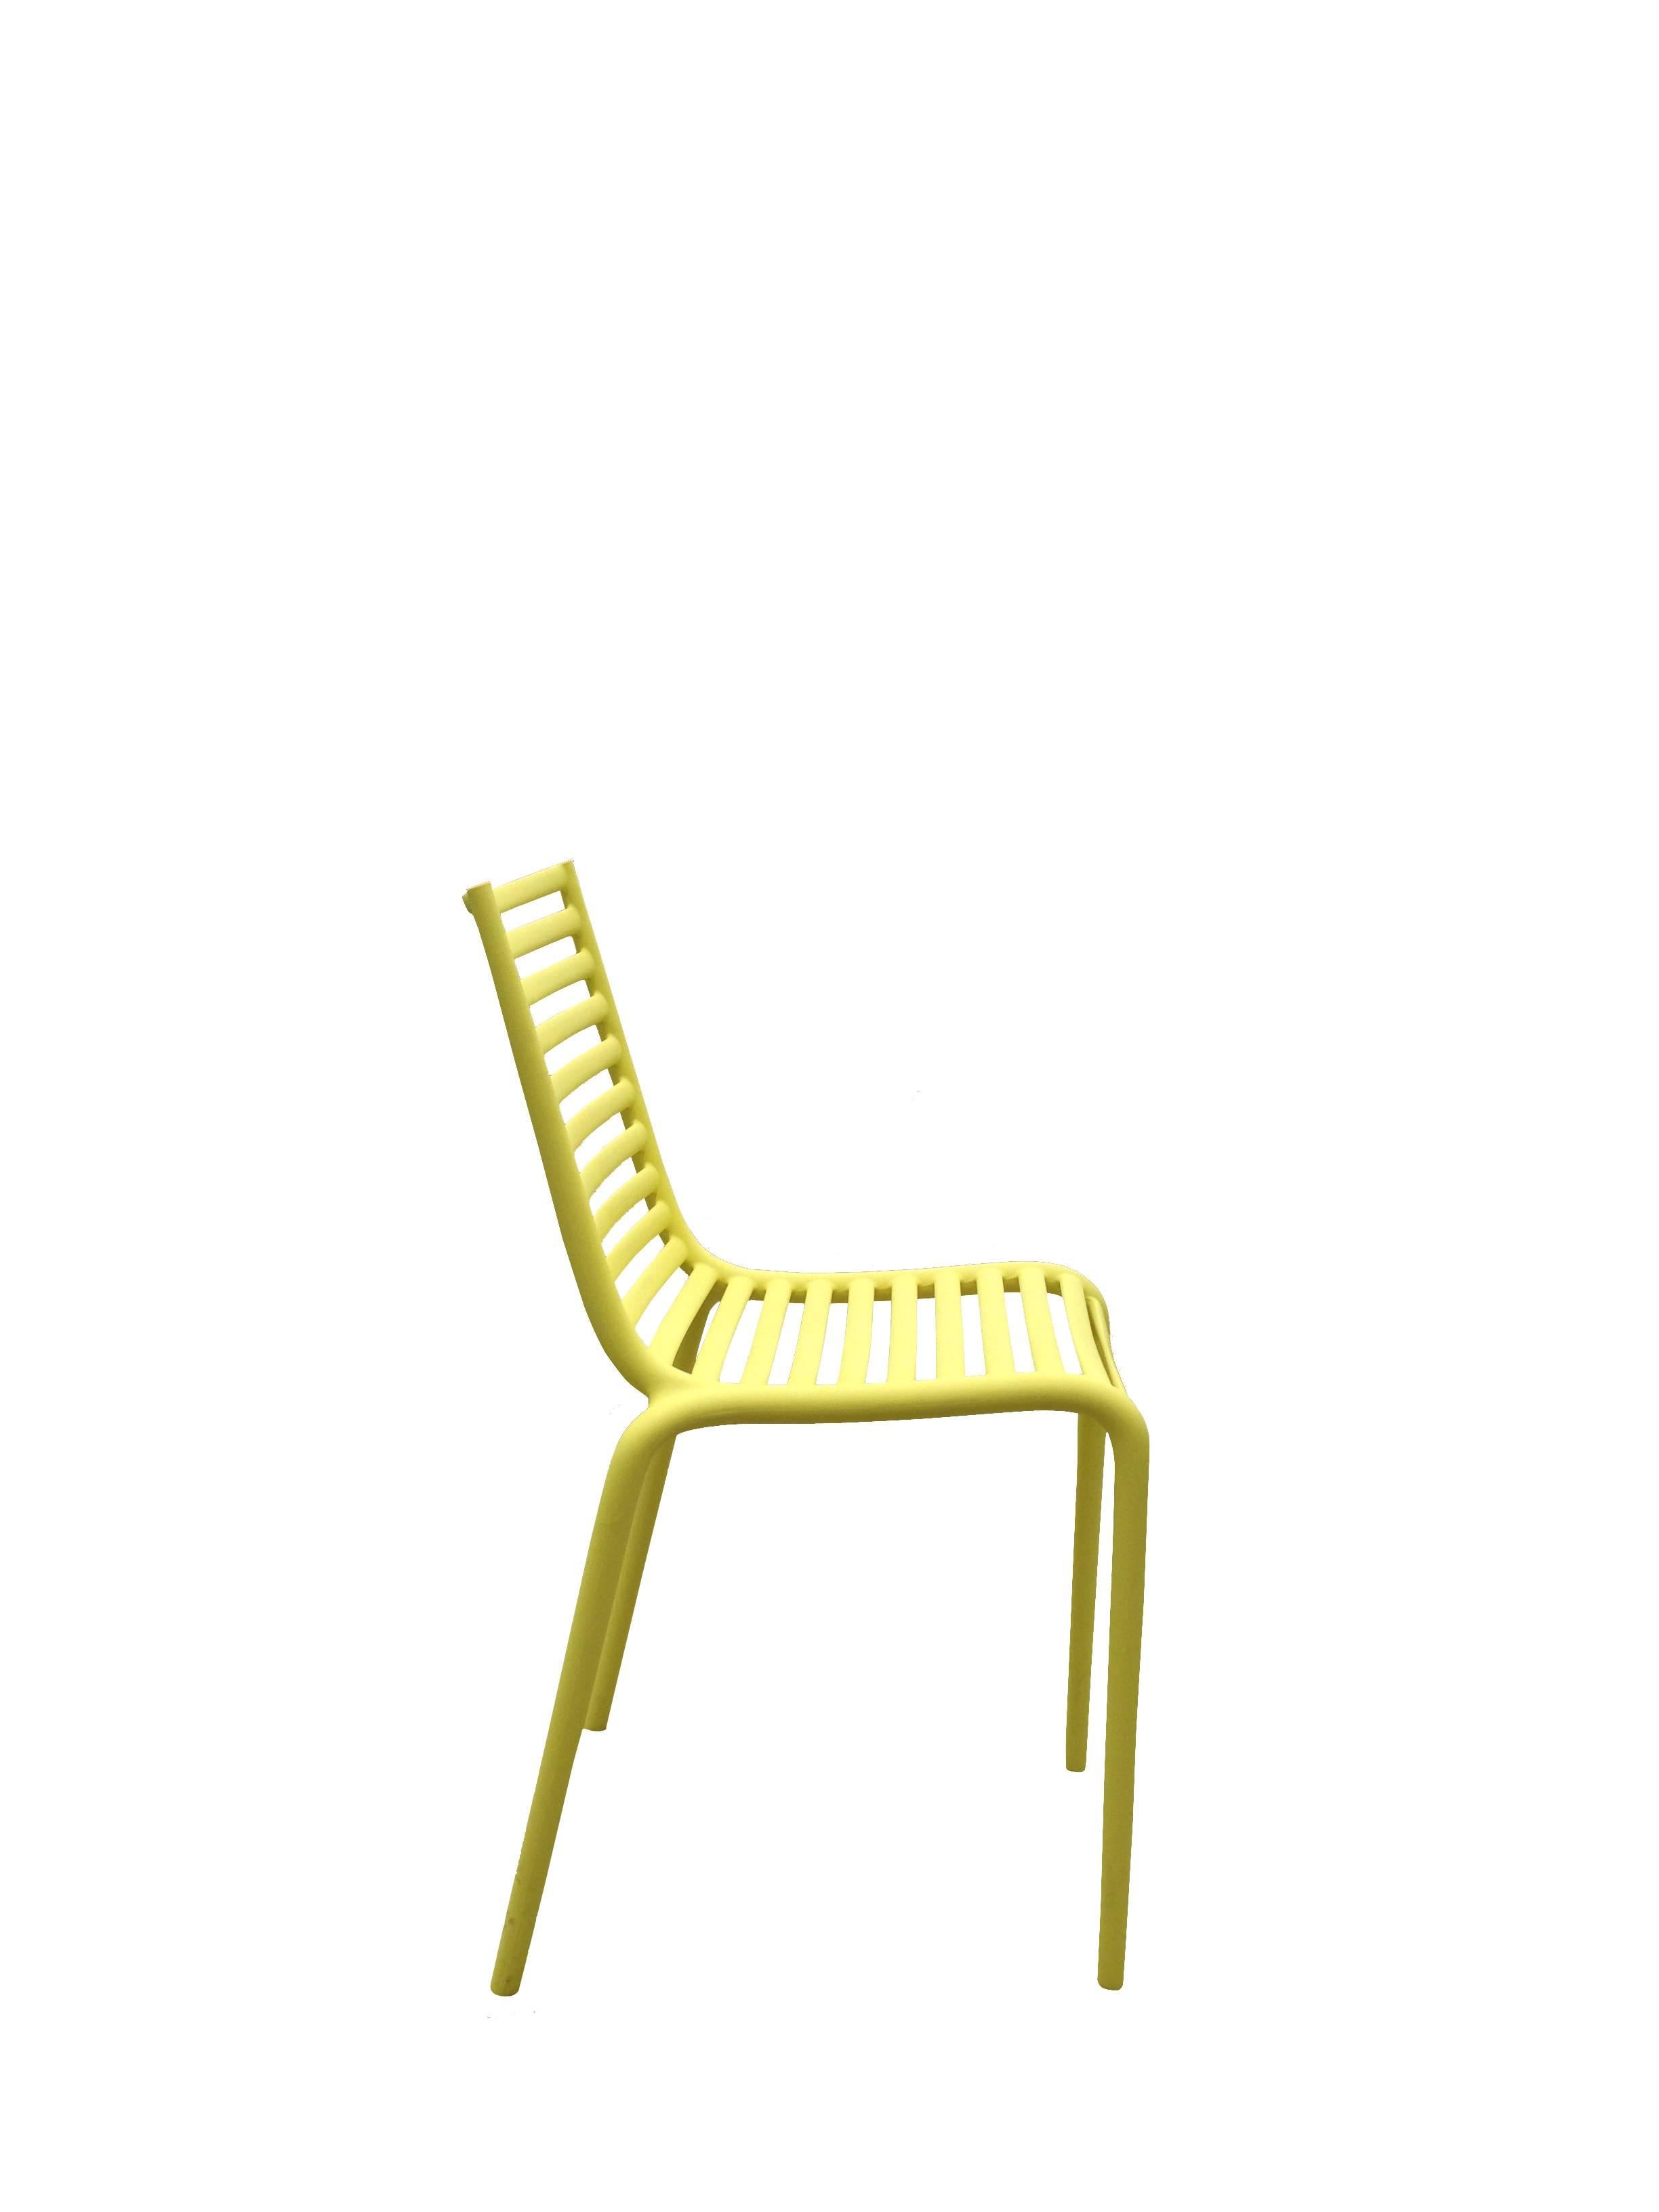 stackable folding chair